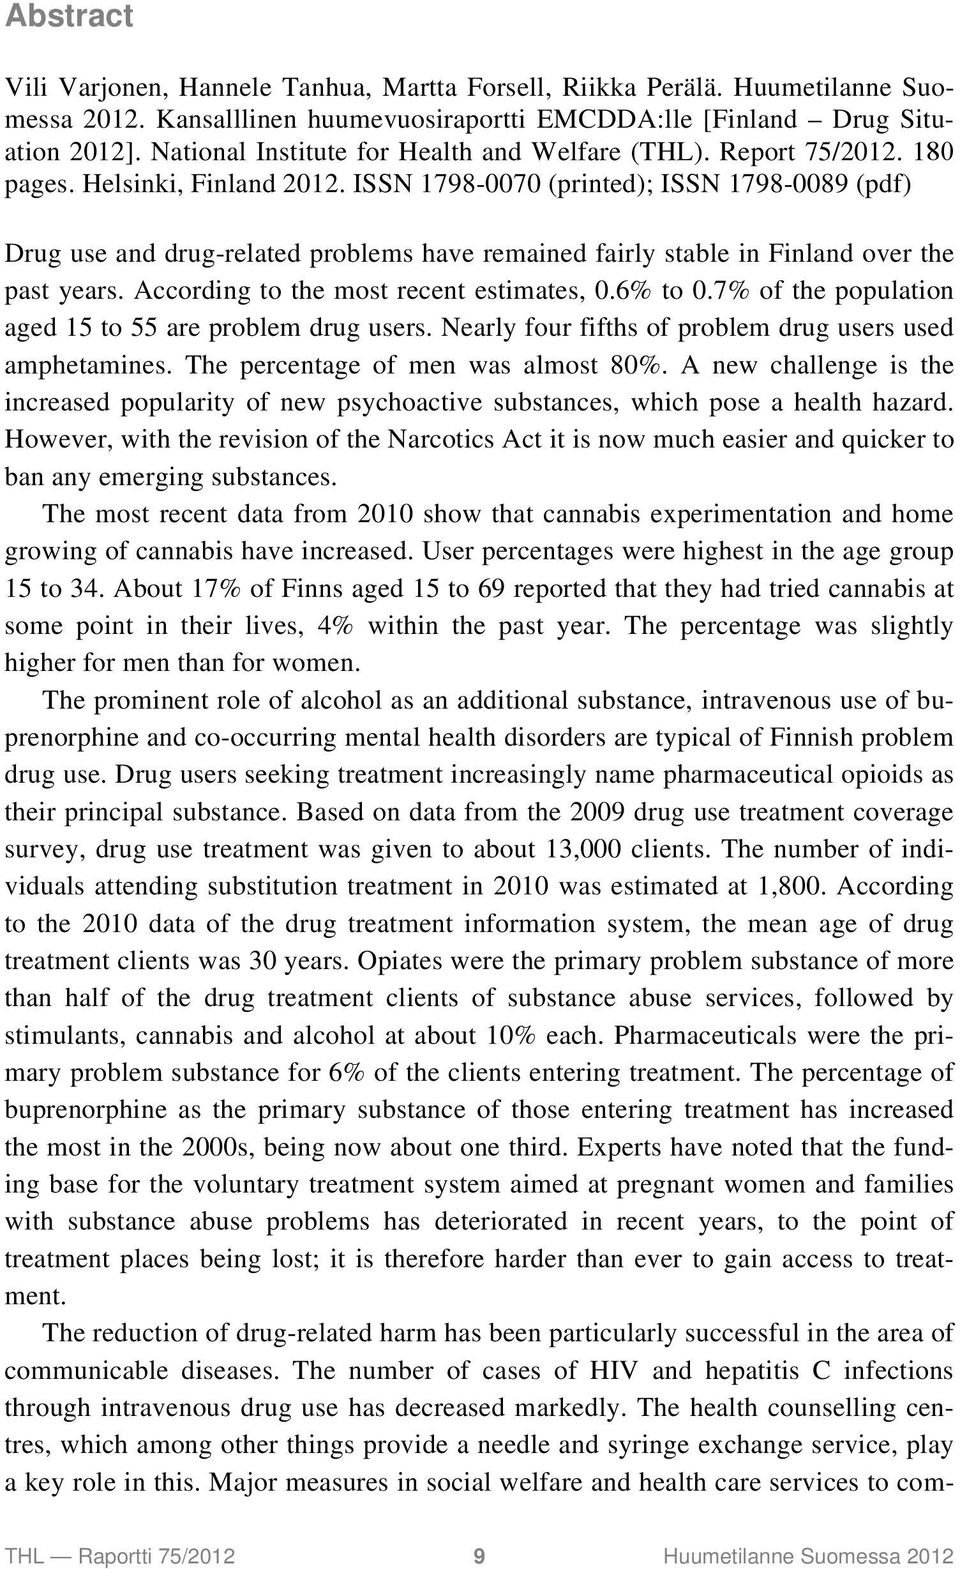 ISSN 1798-0070 (printed); ISSN 1798-0089 (pdf) Drug use and drug-related problems have remained fairly stable in Finland over the past years. According to the most recent estimates, 0.6% to 0.